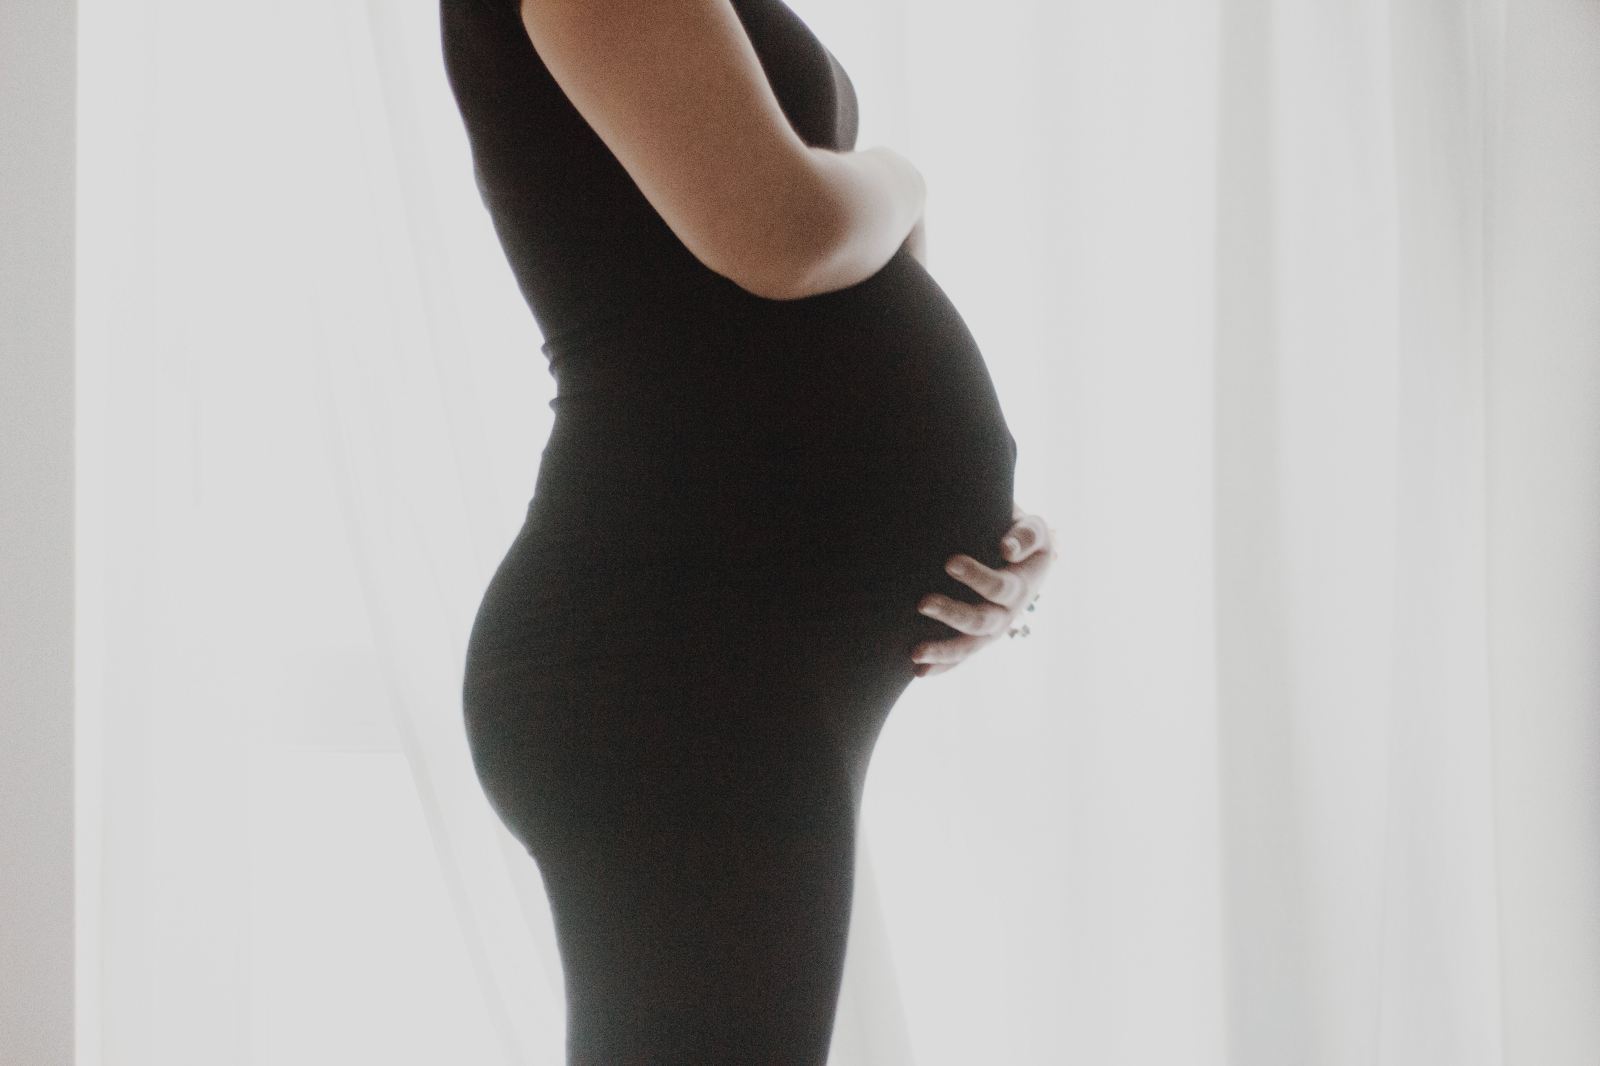 Anxiety and Depression During Pregnancy: What Every Woman Should Know